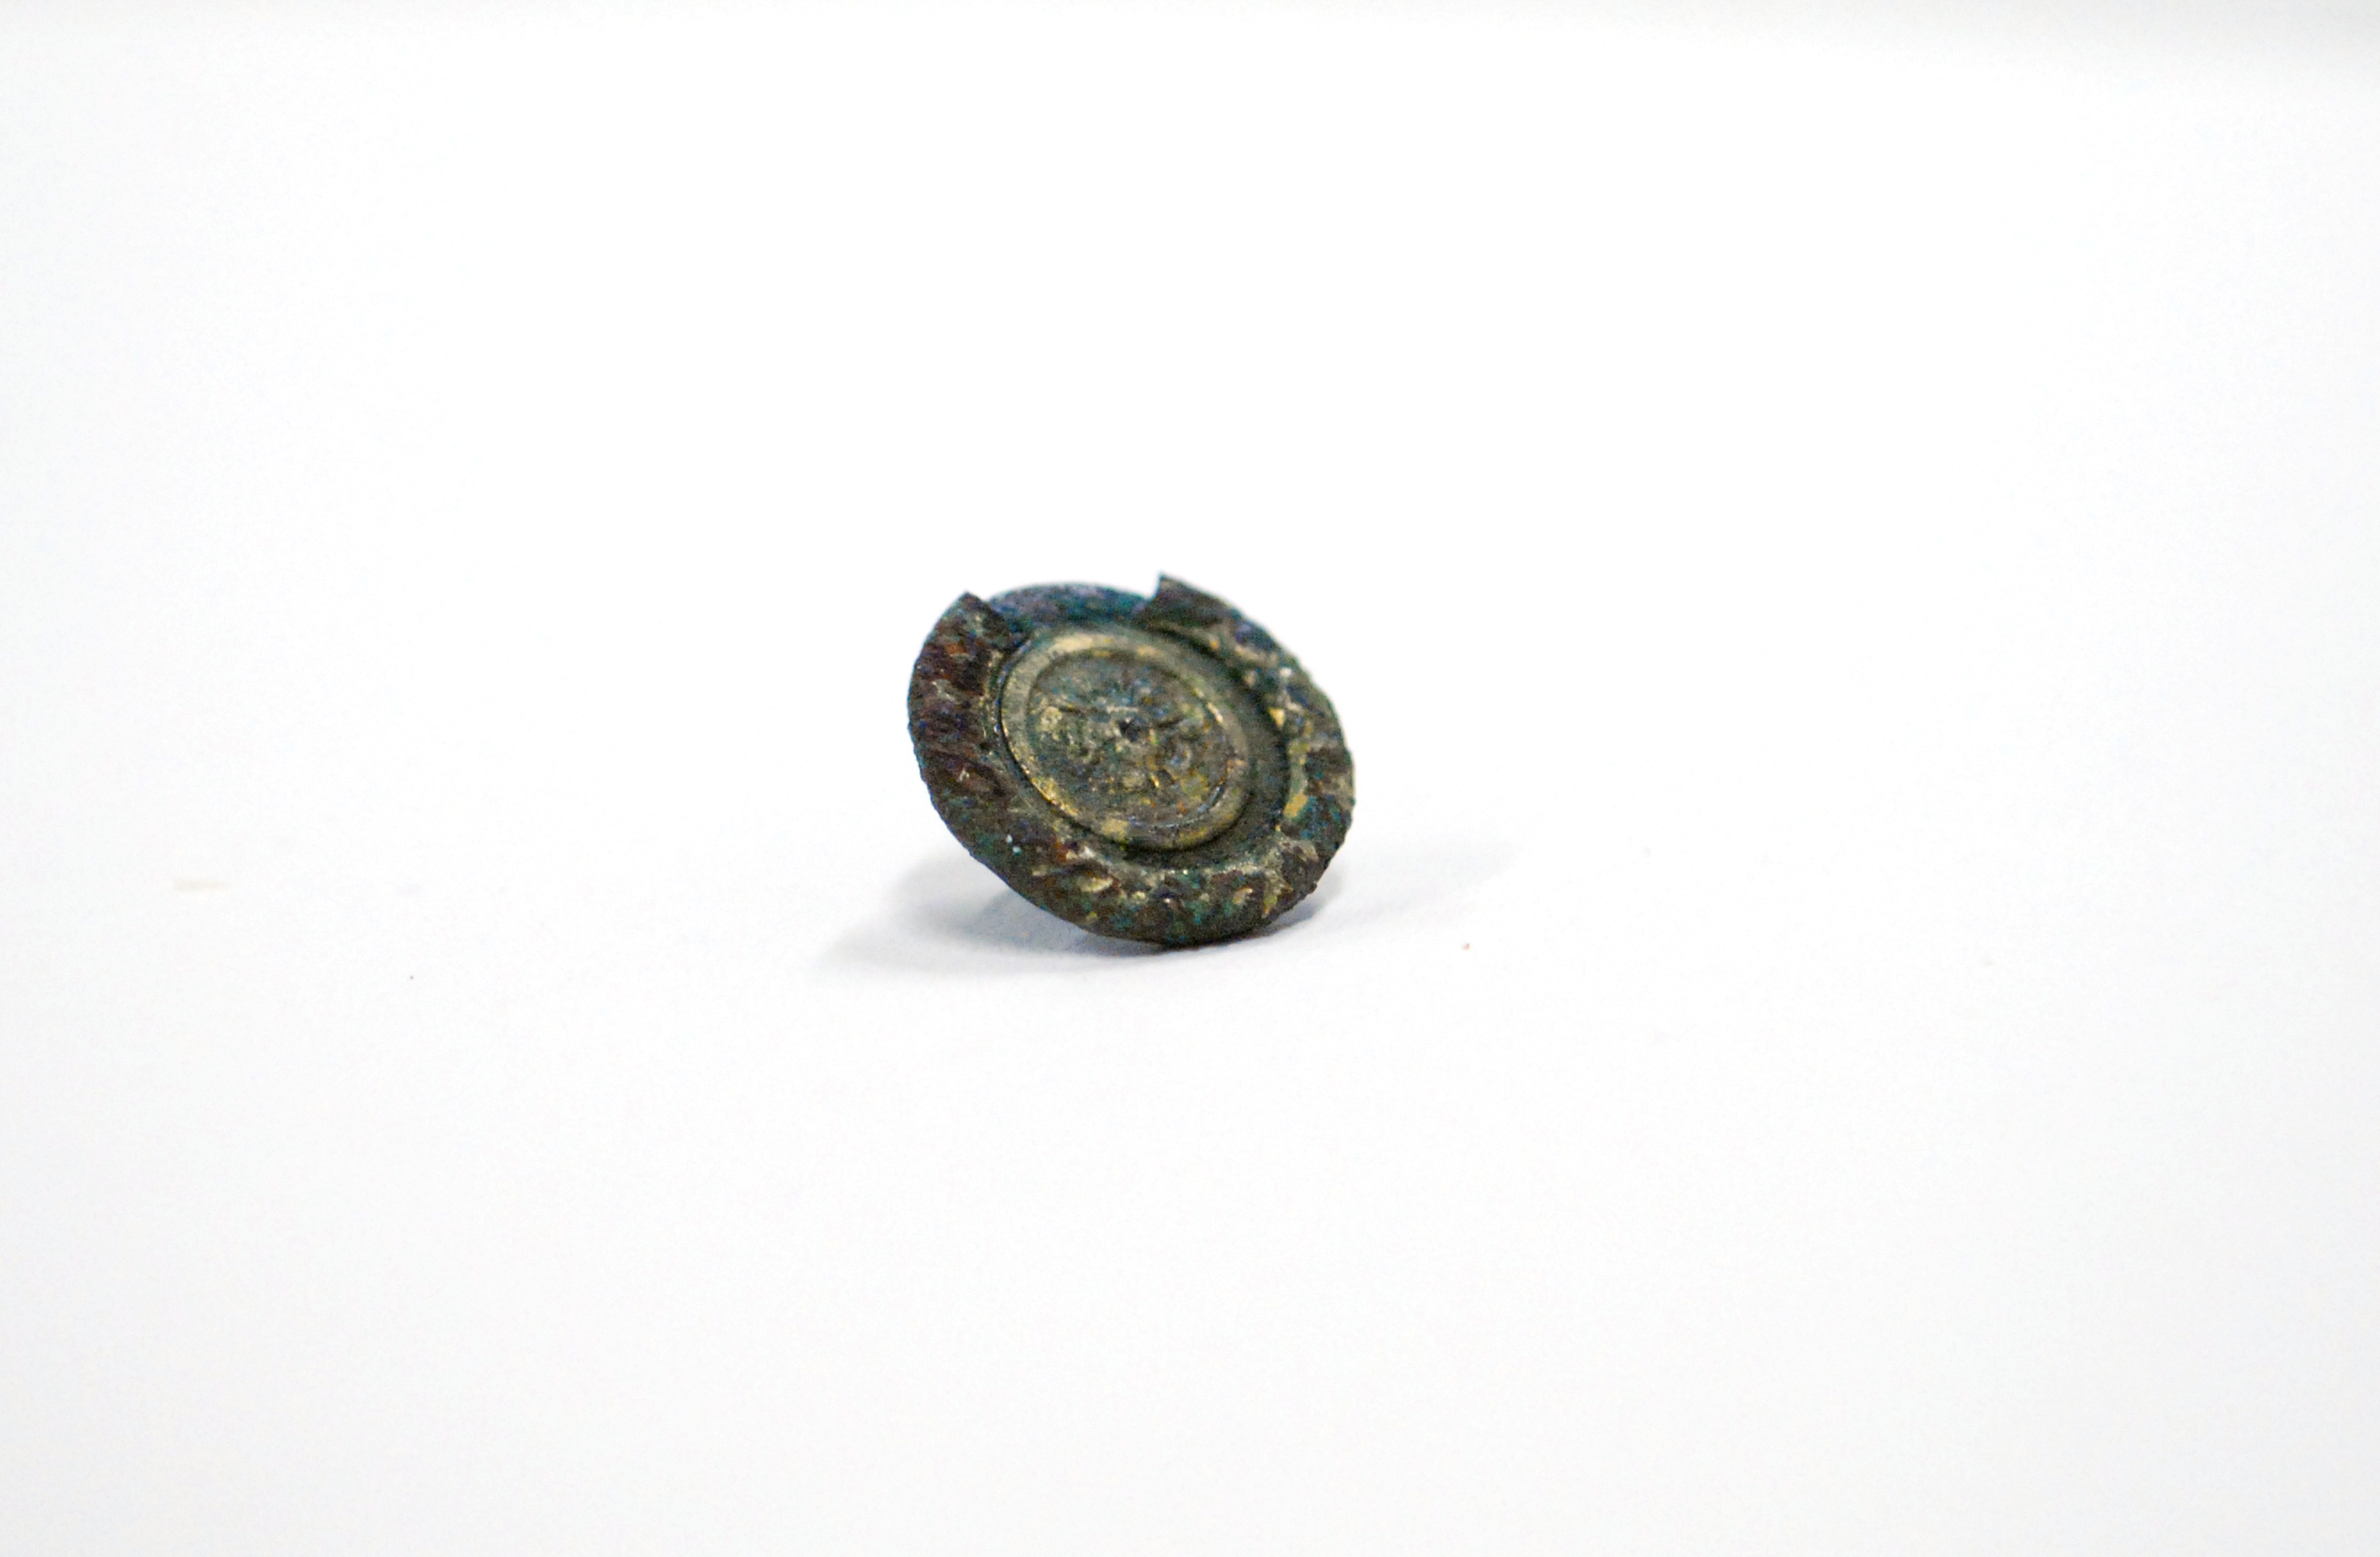 Copper alloy button with a floral design, uncovered in 2011 as a part of the Seneca
Village Project.